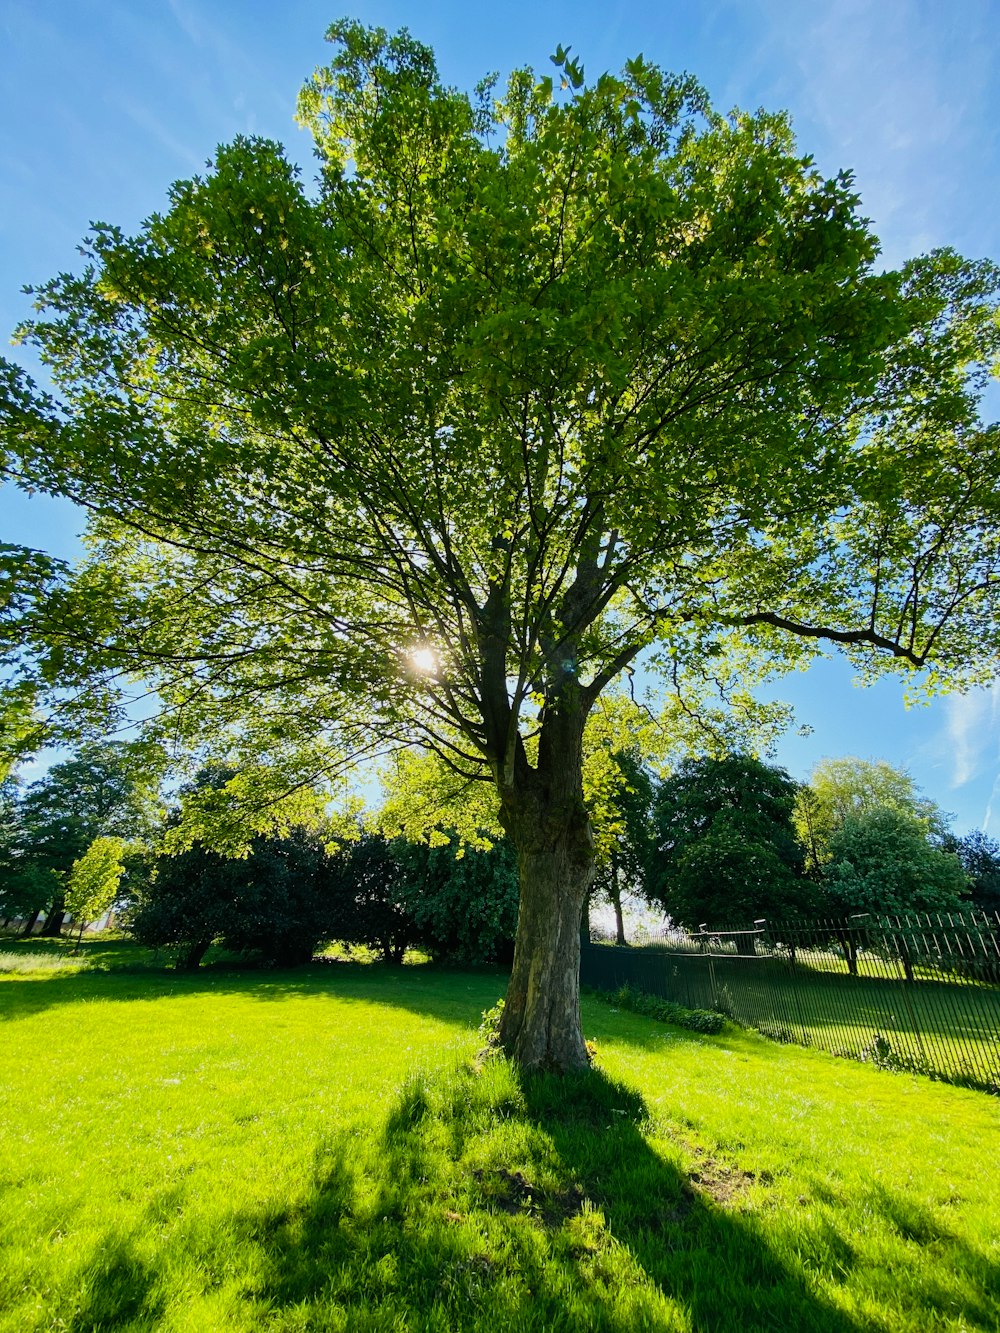 a large green tree in a grassy field